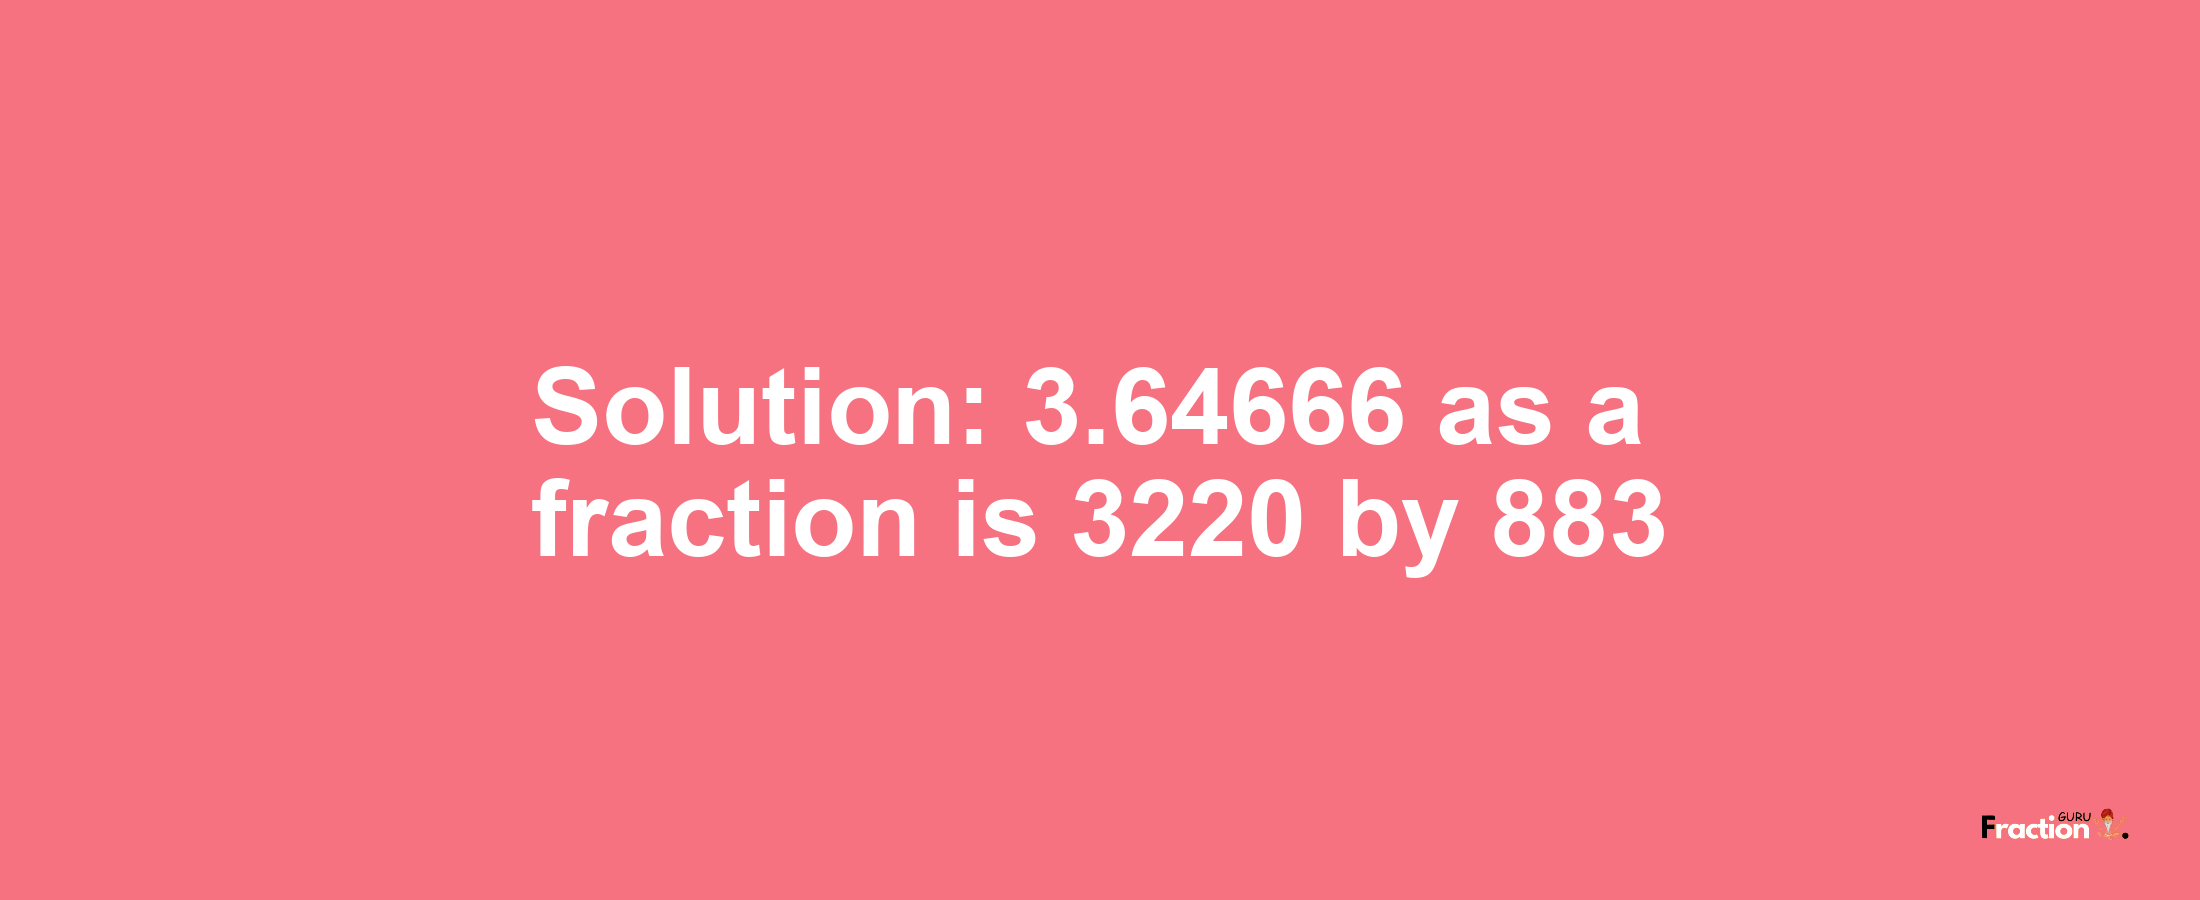 Solution:3.64666 as a fraction is 3220/883